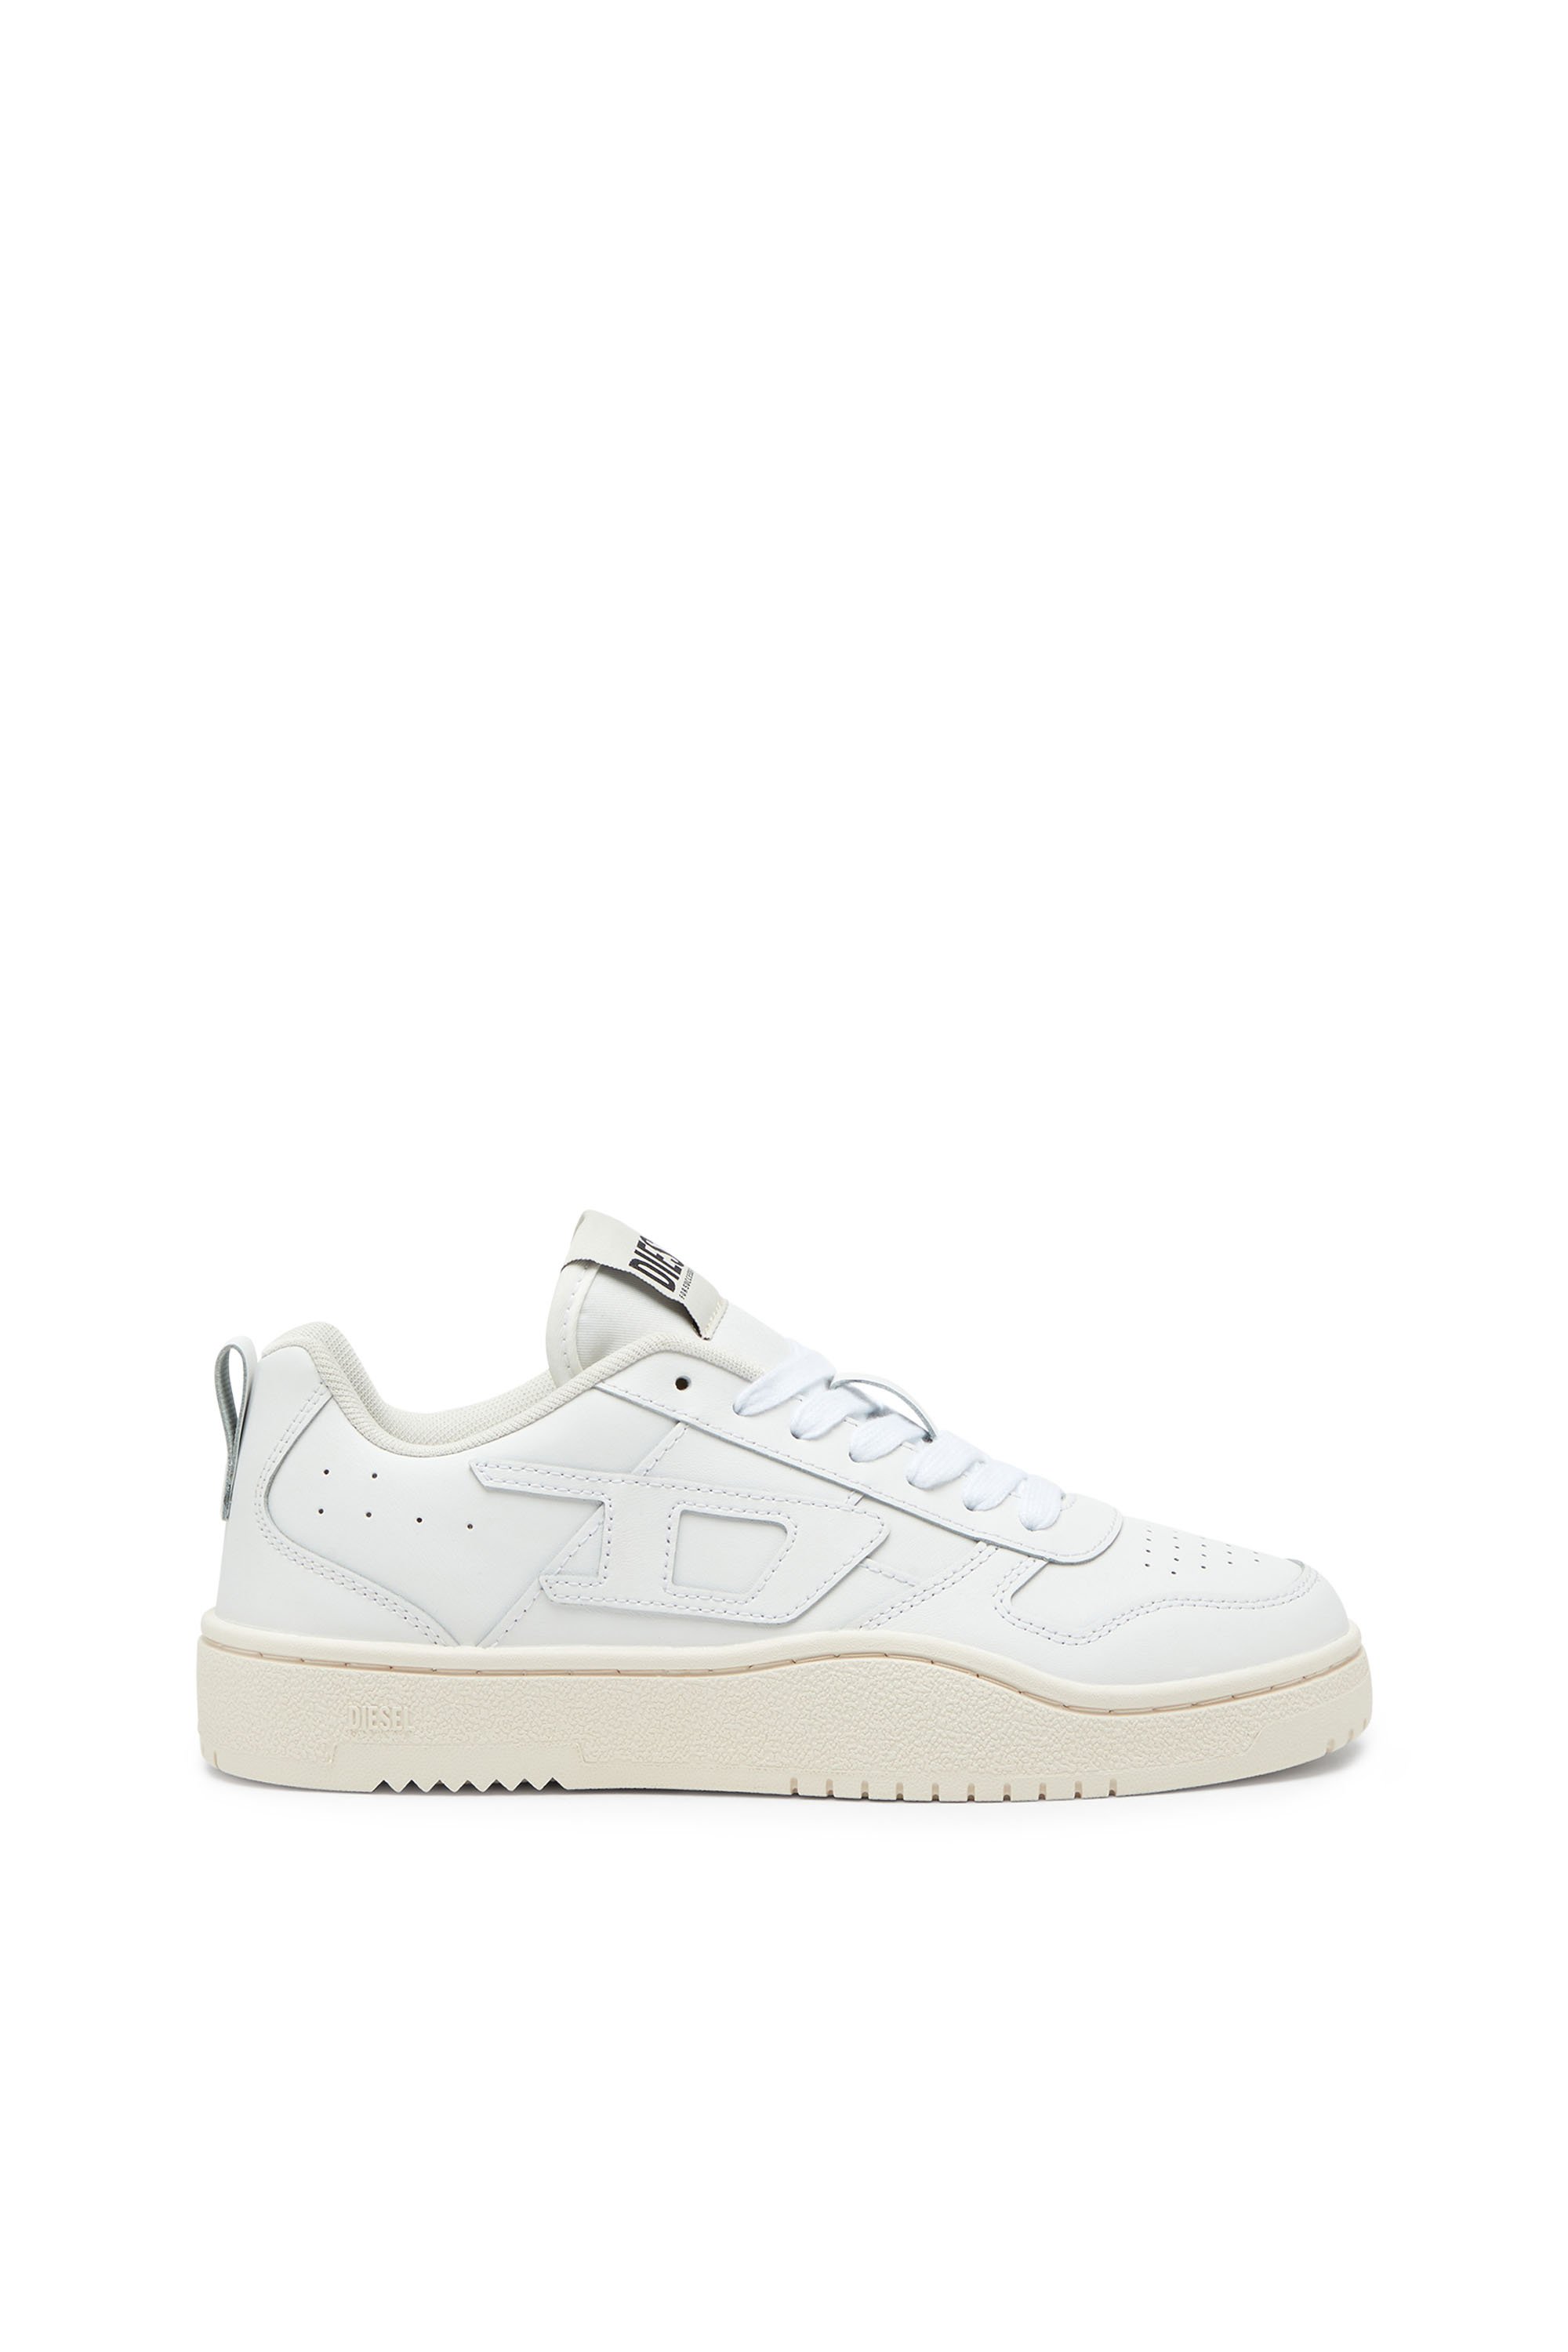 Diesel - S-Ukiyo V2 Low - Low-top sneakers in leather and nylon - Sneakers - Man - White